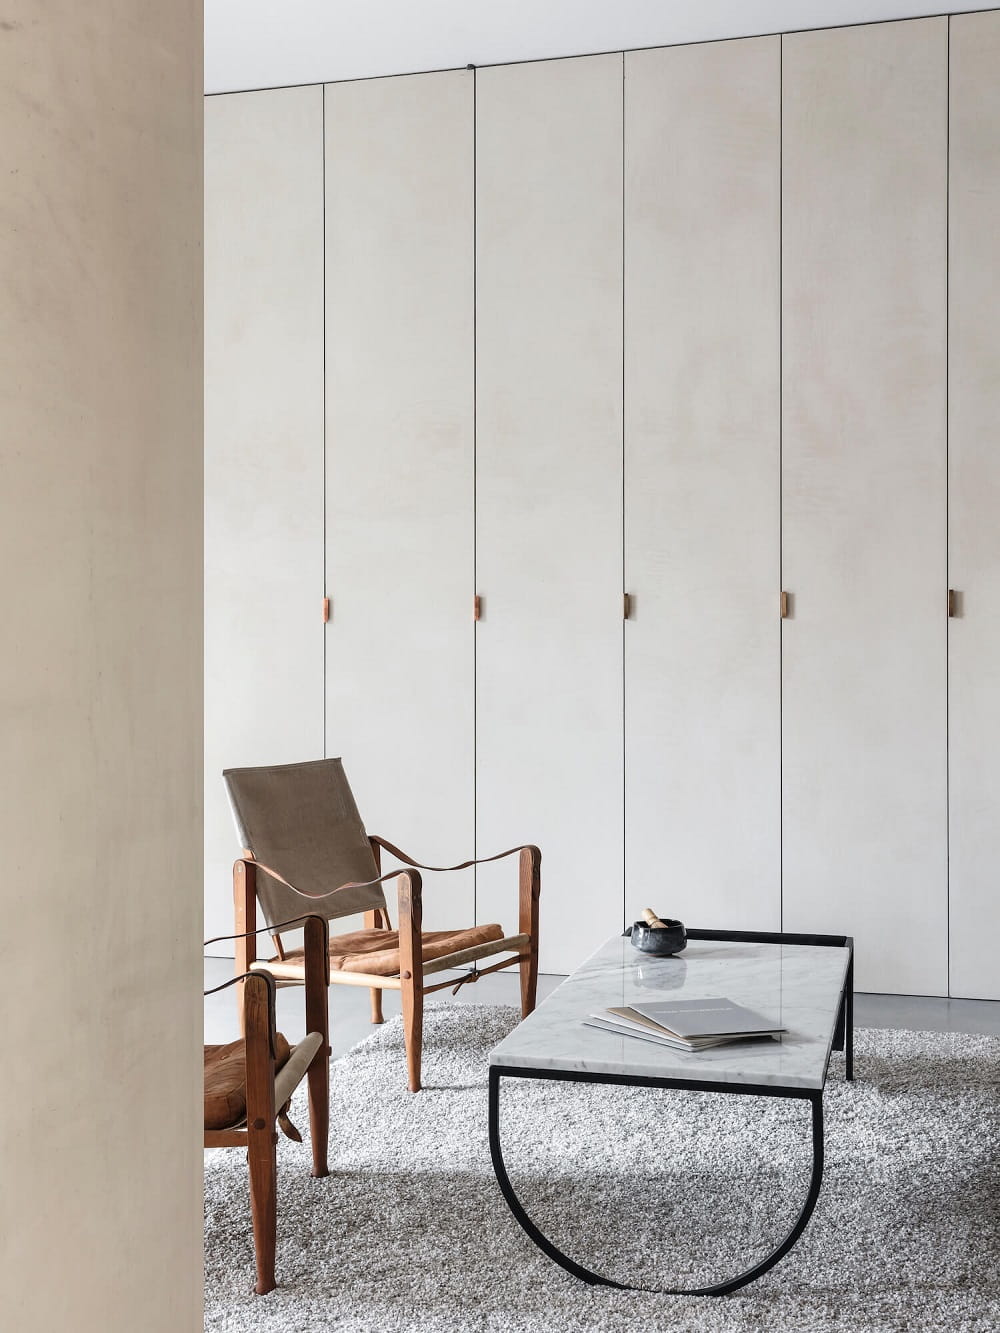 Safari Chairs by Kaare Klint for Carl Hansen & Son; Piero Coffee Table by Joa Herrenknecht from Bolia; Mayor Sofa by Arne Jacobsen & Flemming Lassen for &Tradition